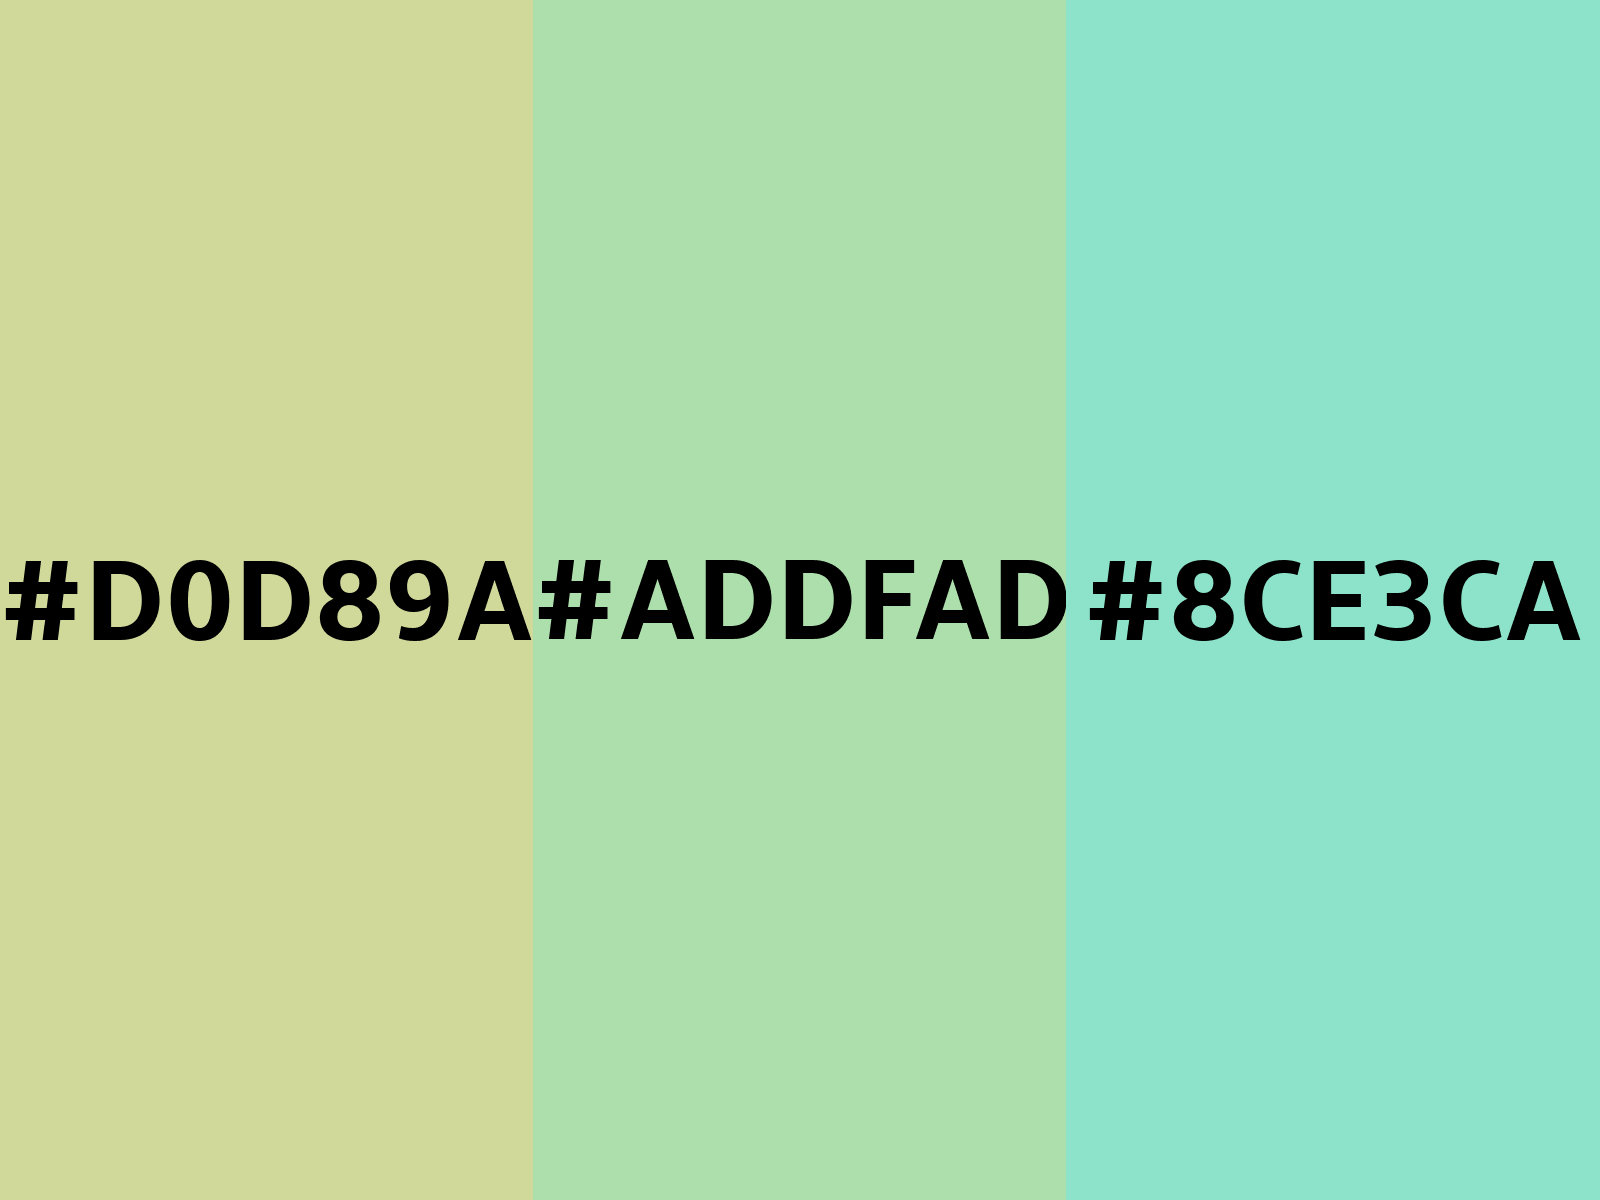 colorswall on X: Shades of Moss Green color #ADDFAD hex #addfad